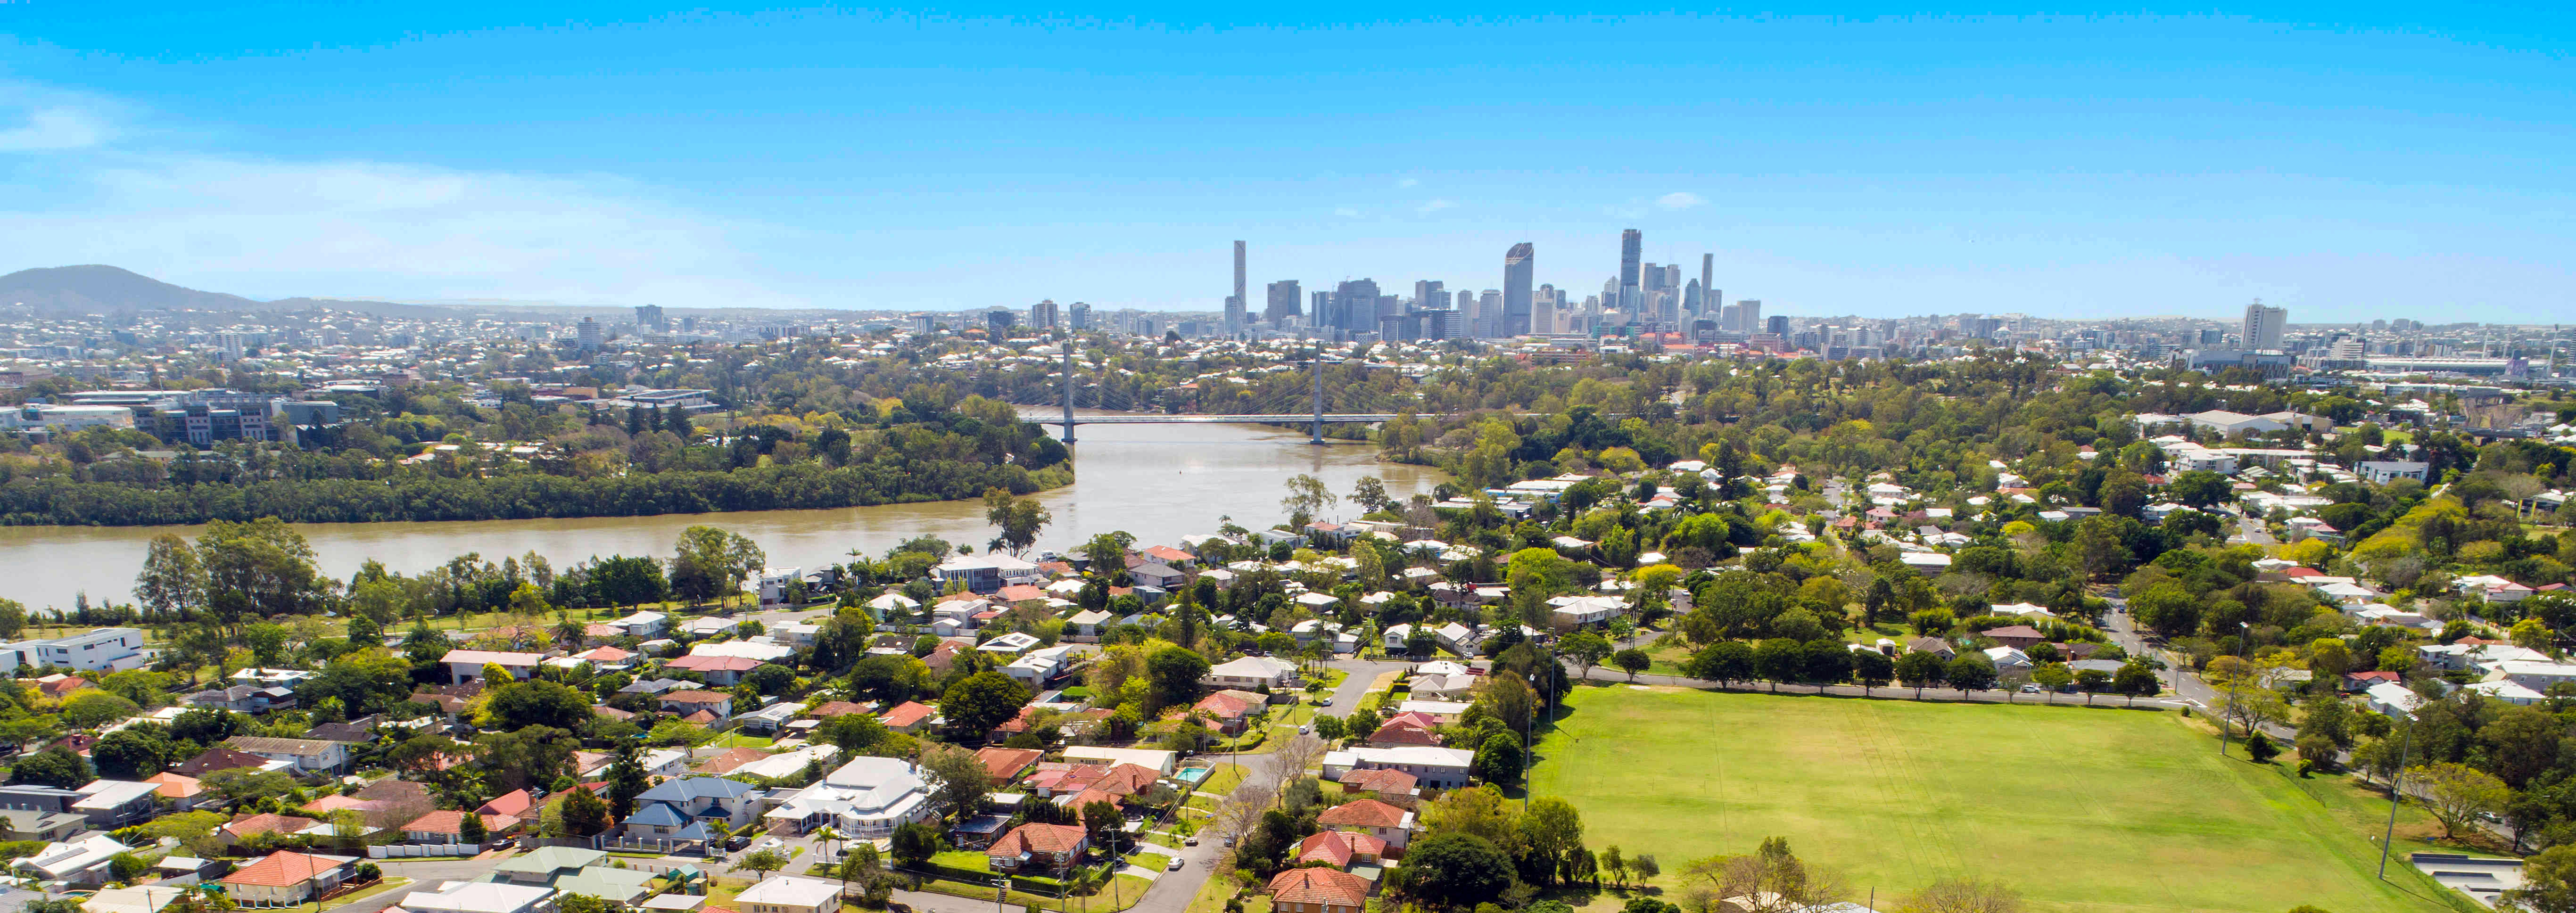 Brisbane house prices to see significant gains